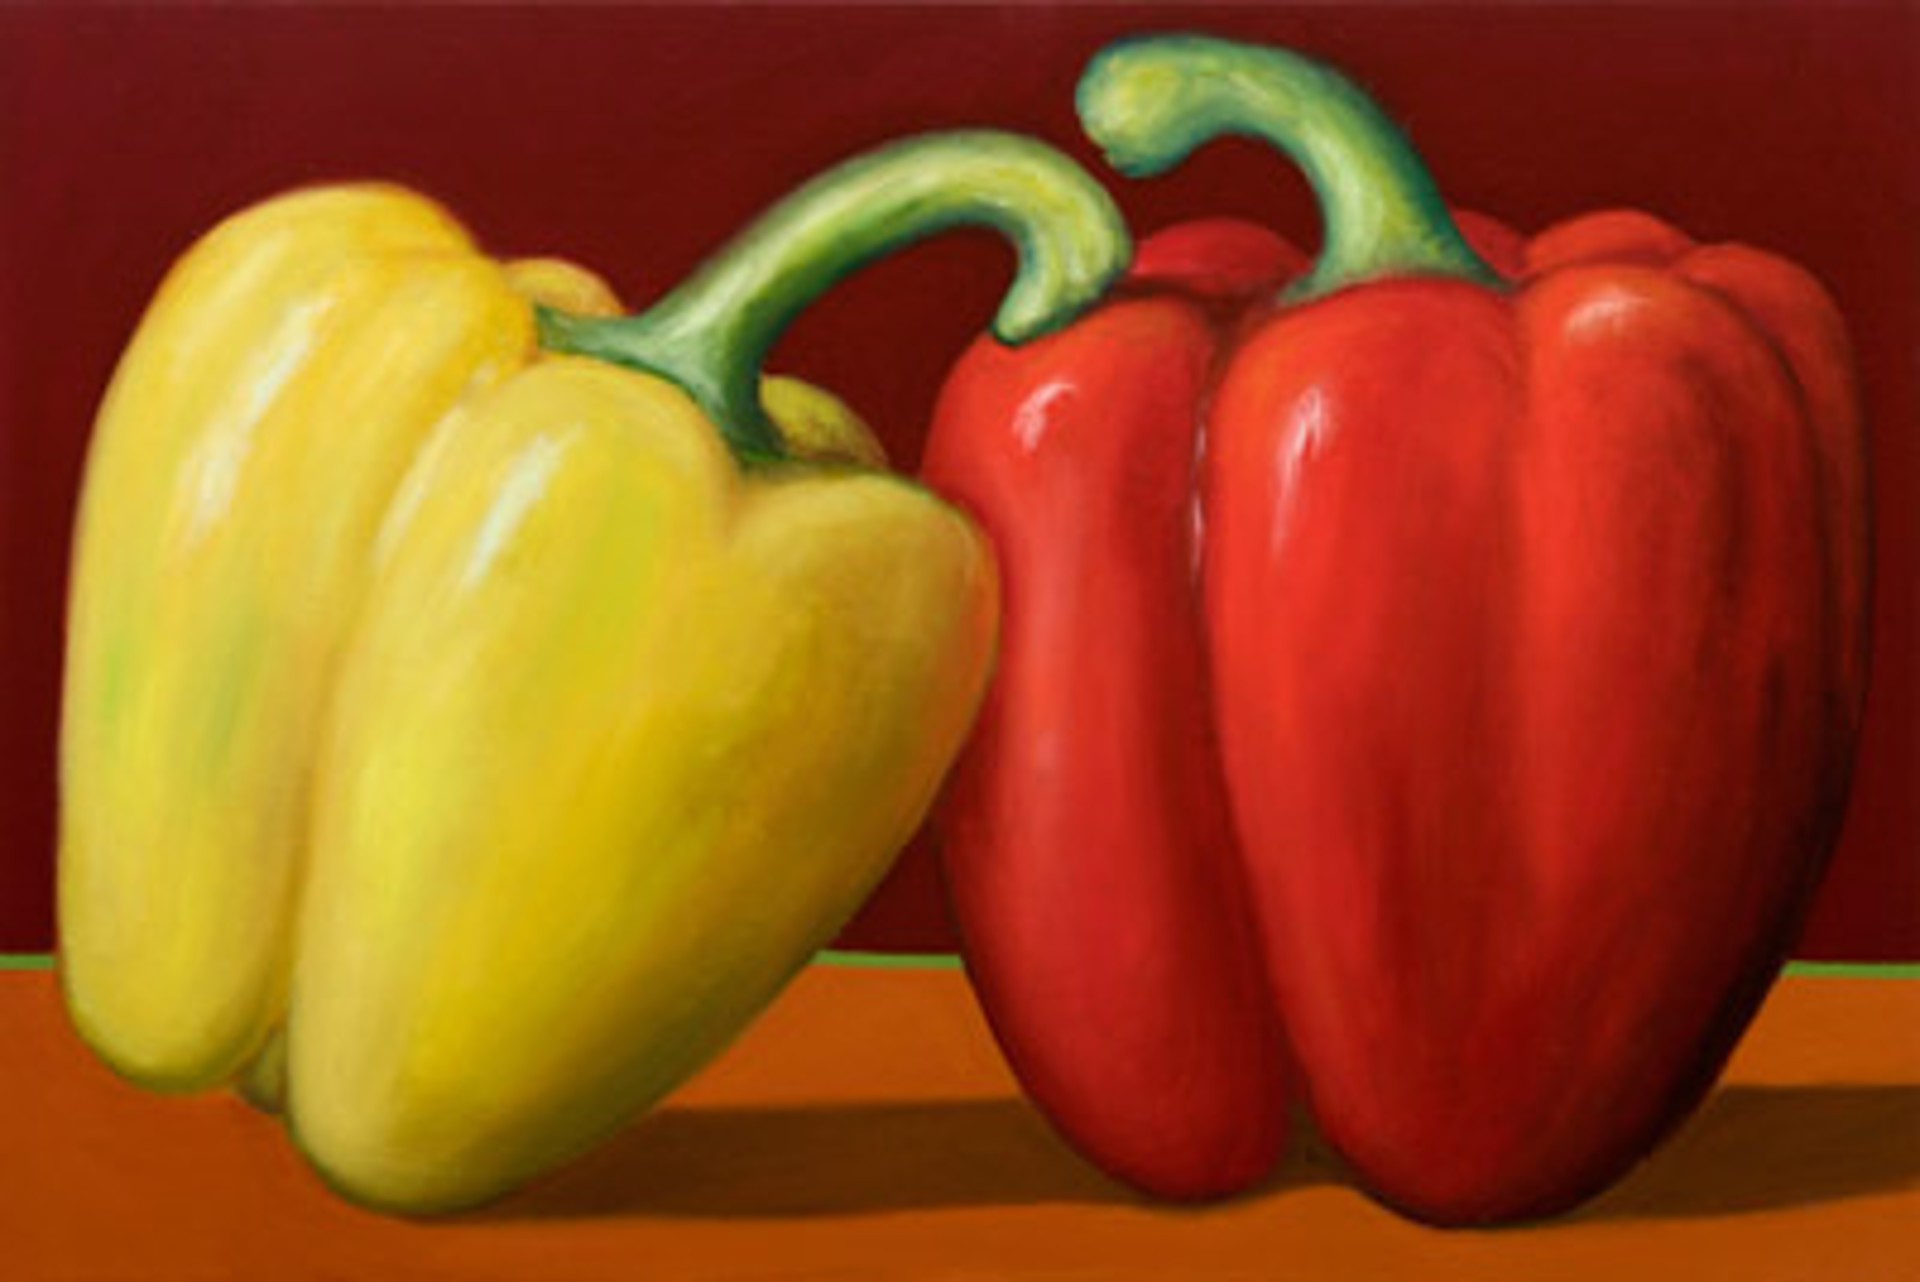 Two Bell Peppers by Bill Chisholm